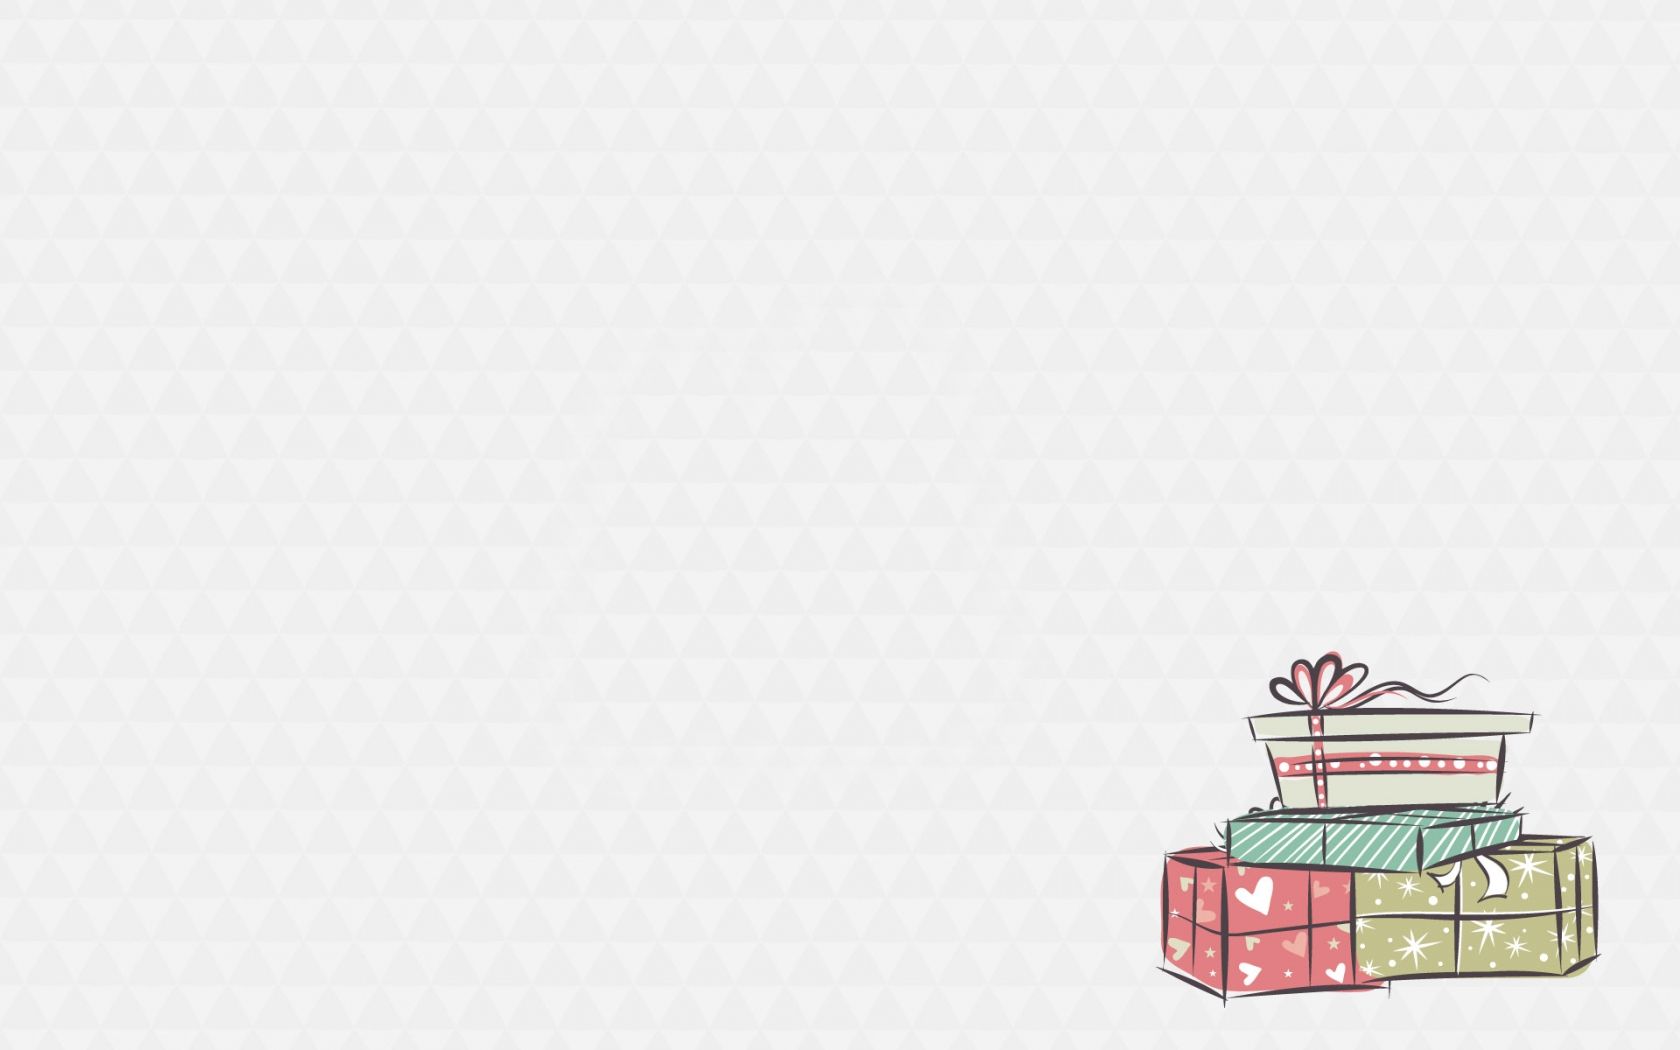 Graphical Wallpaper 4 Minimal Christmas Edition Ace HD Wallpaper